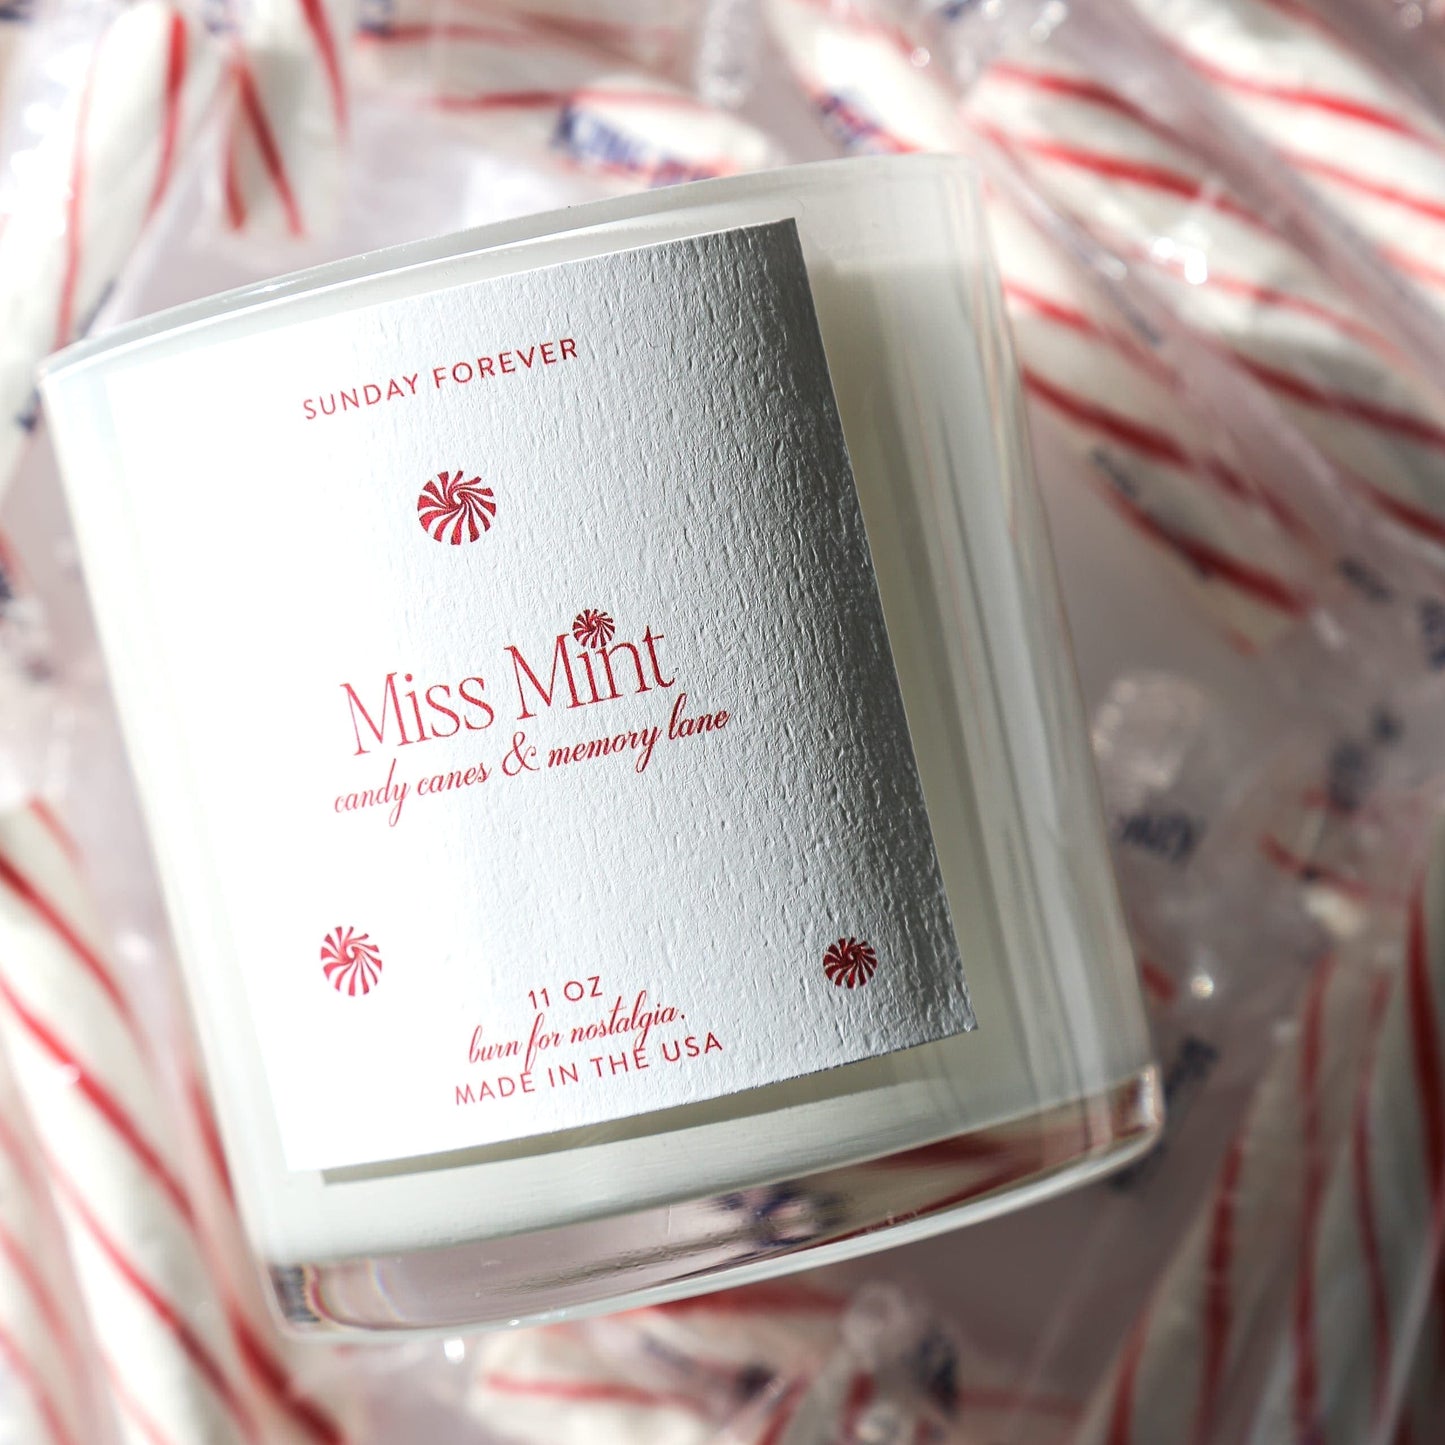 NEW! Limited Edition Miss Mint Luxury Candle - CANDLES-Sunday Forever